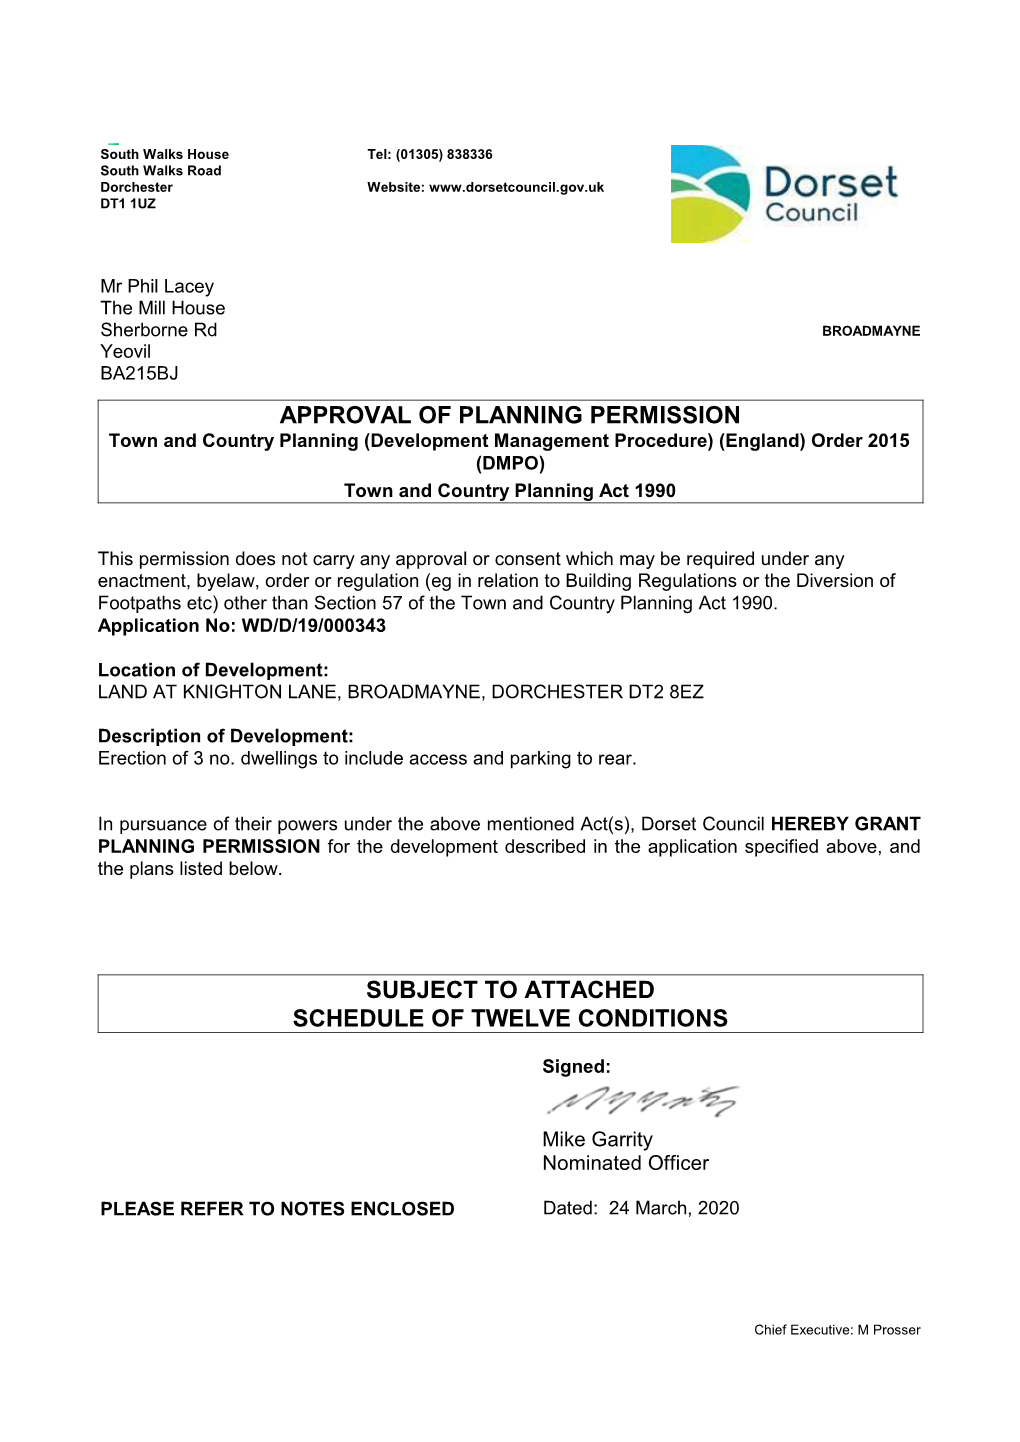 Approval of Planning Permission Subject To